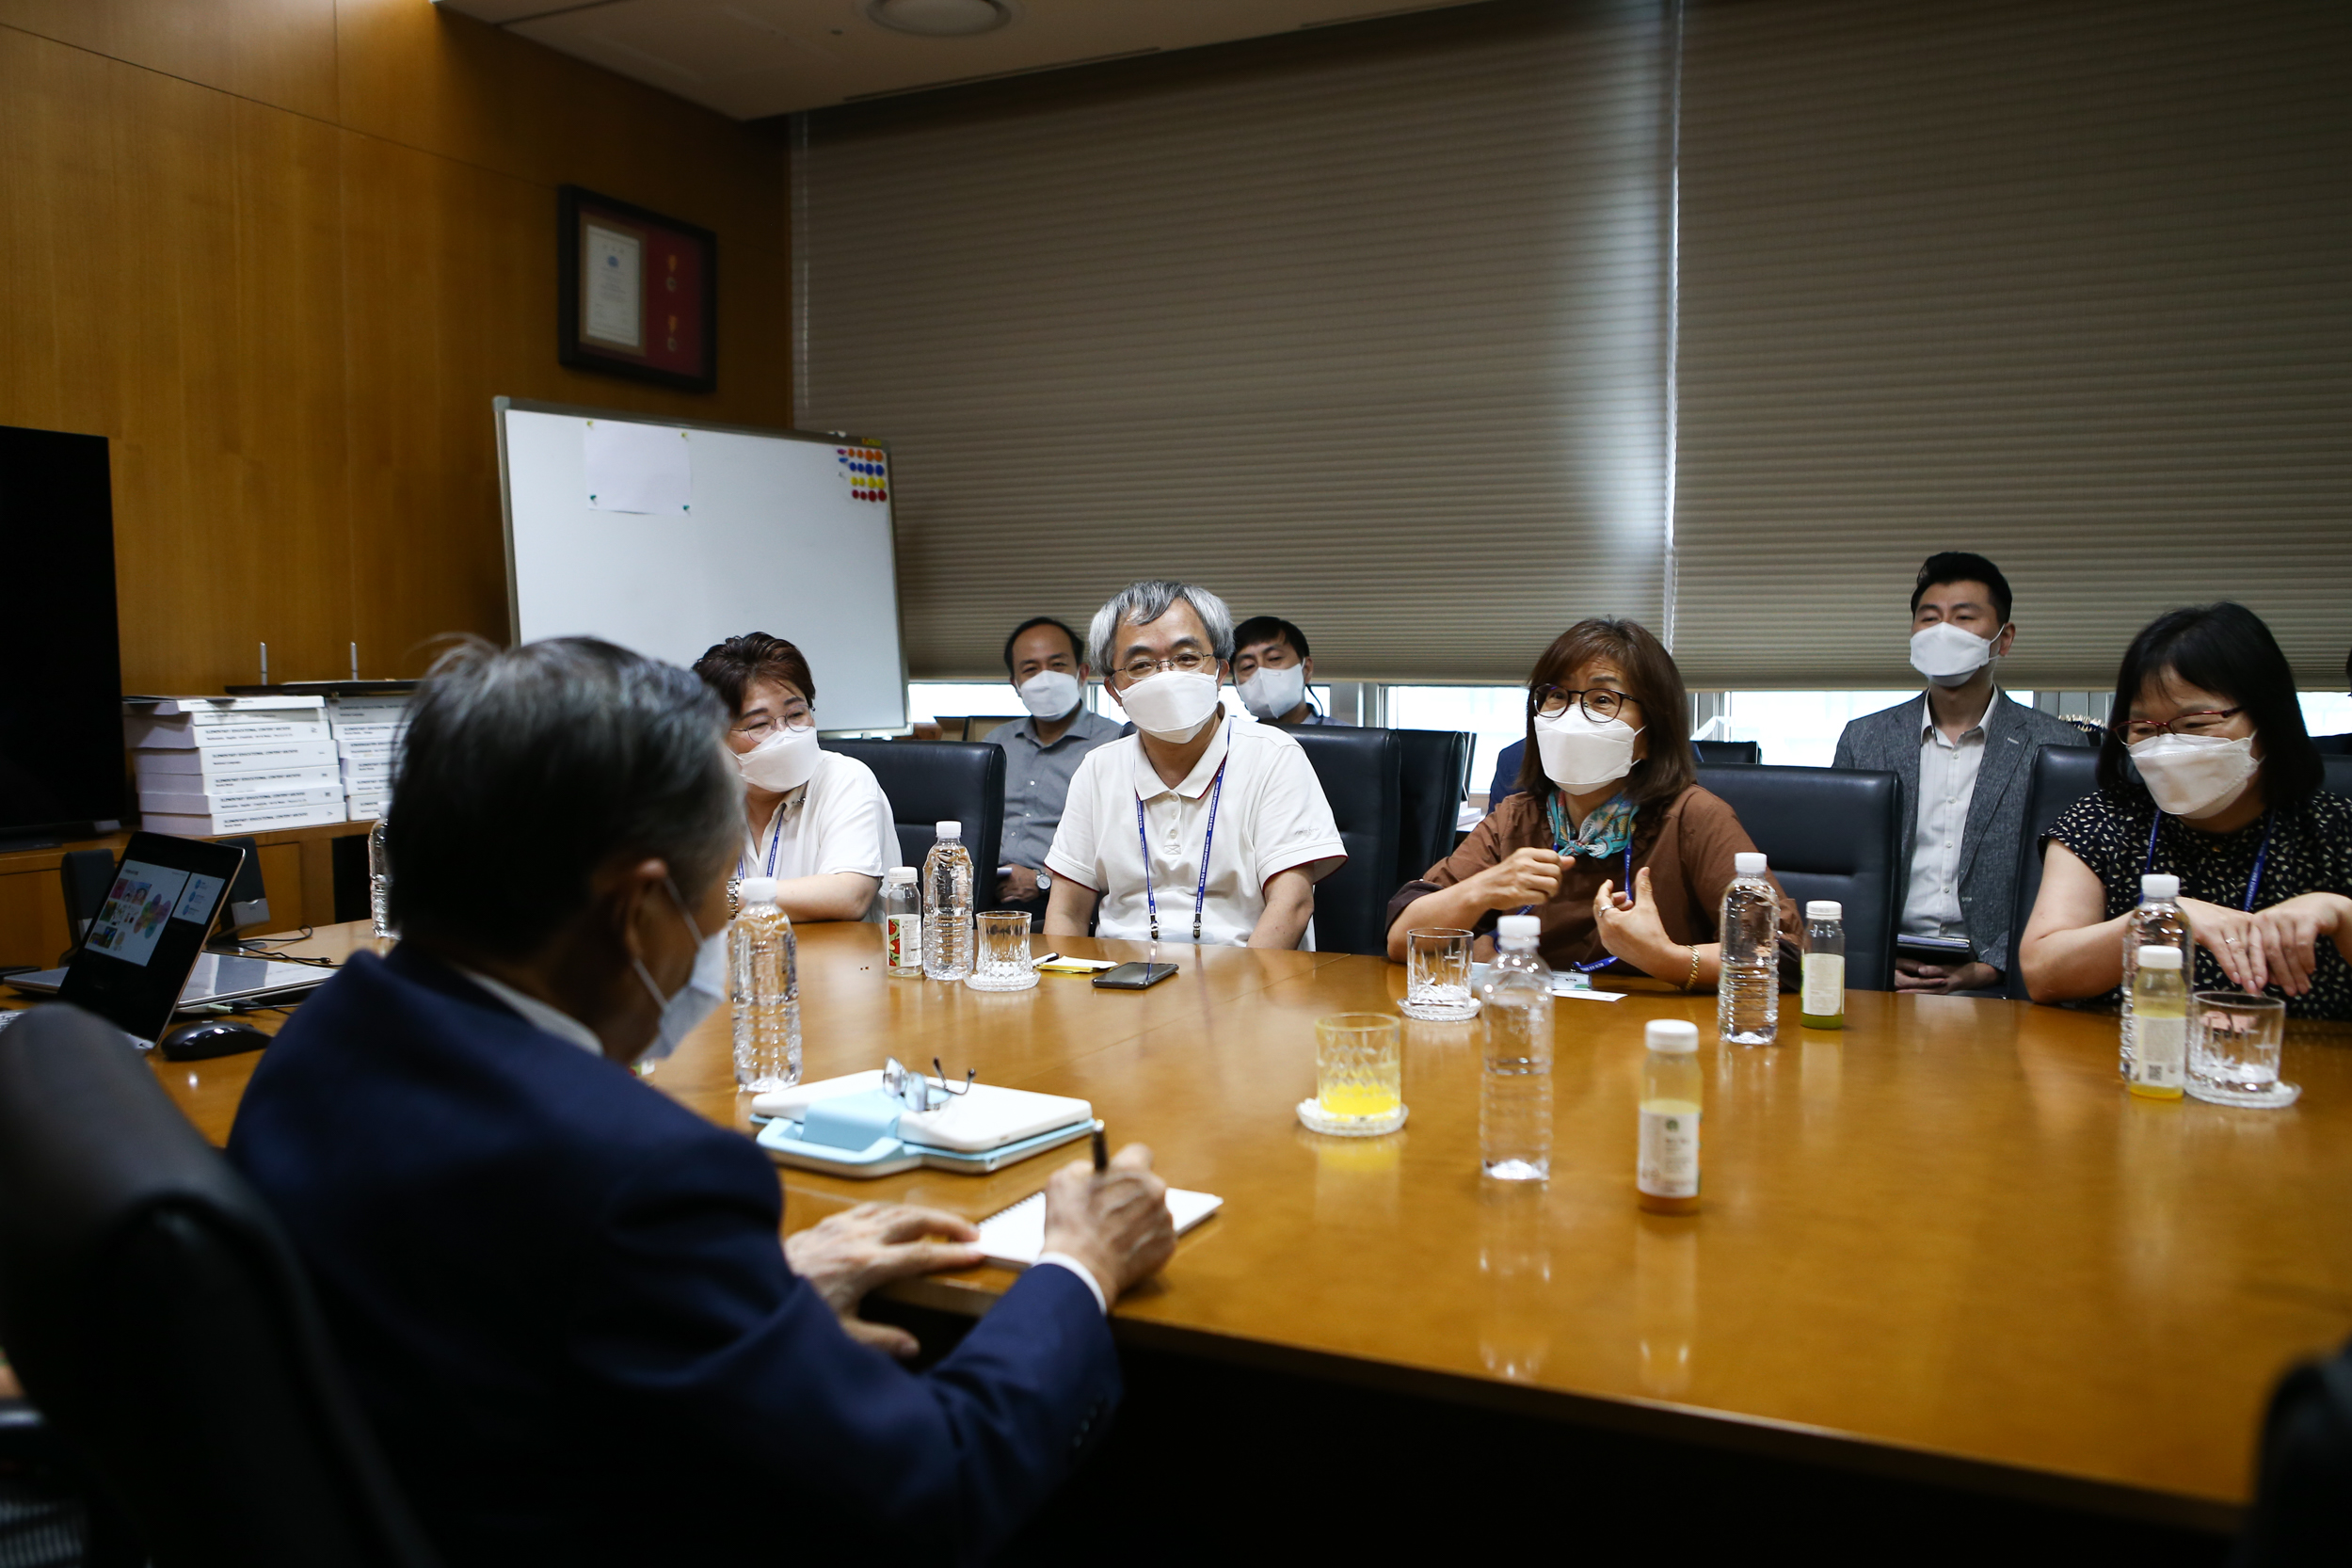 Tour of Ice Cream Media (digital educational content provider) and meeting with Chairman Ki-seok Park (2)